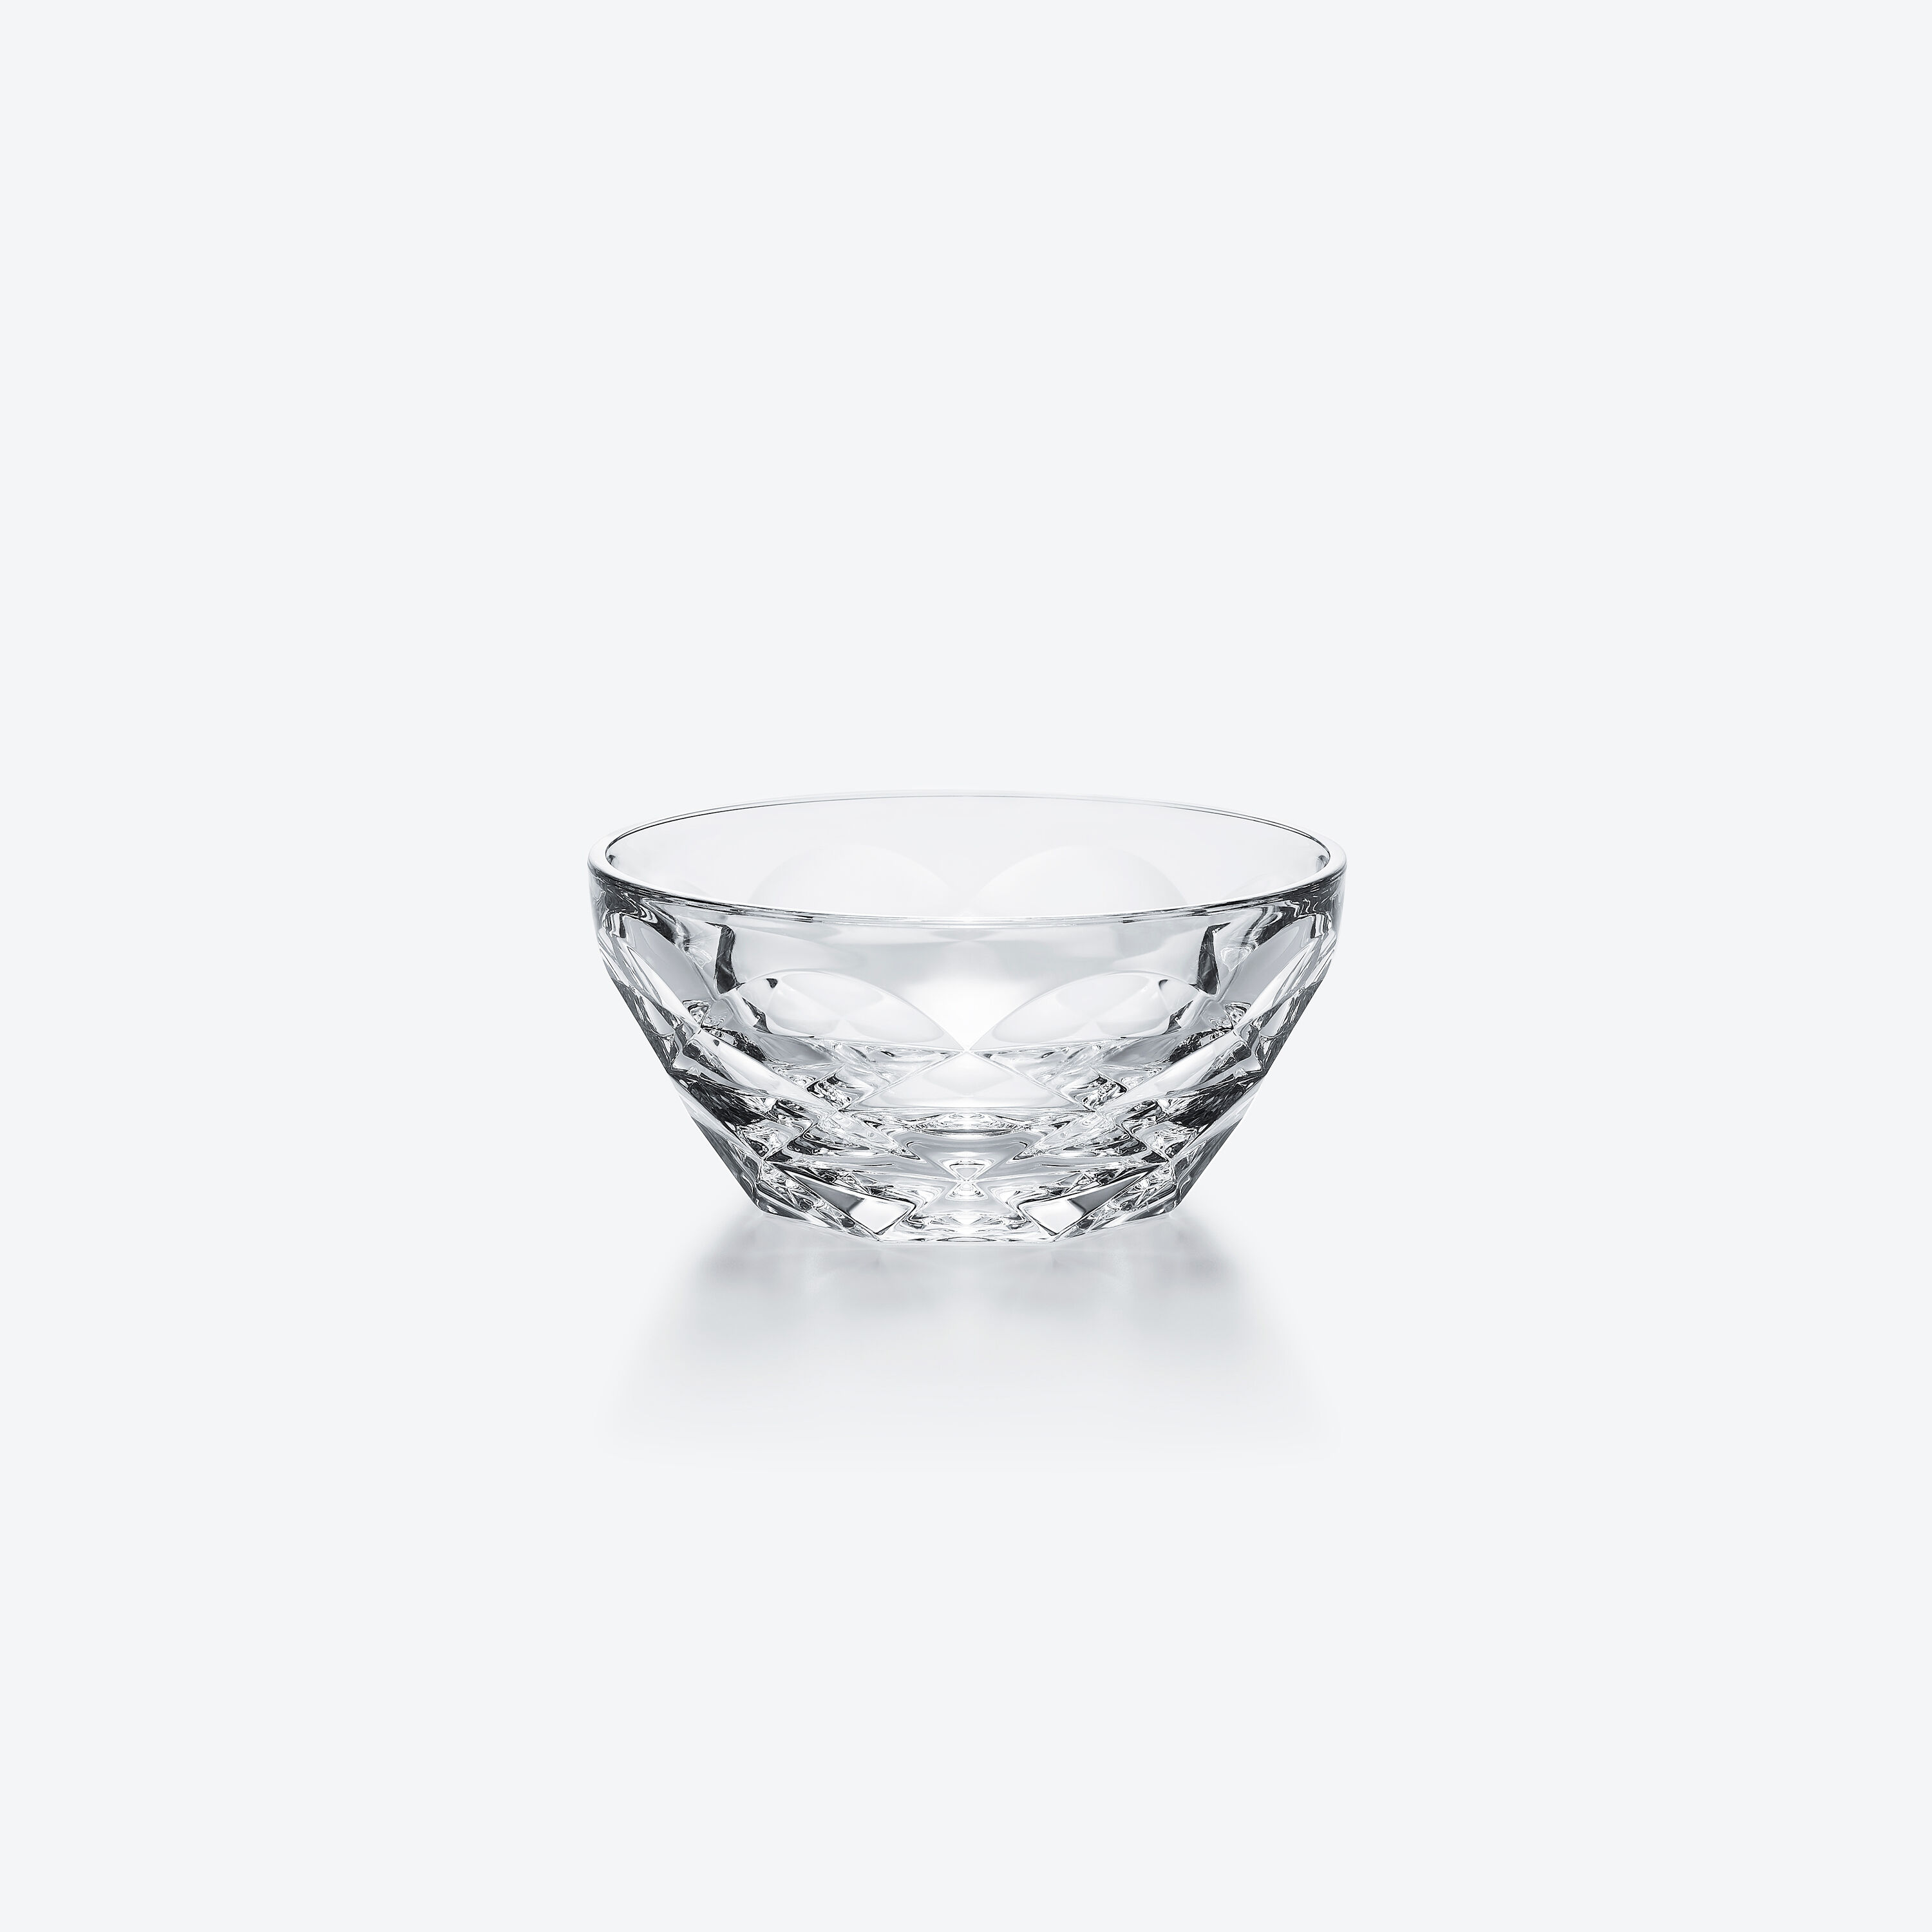 Cocooning Baccarat style | Baccarat United States